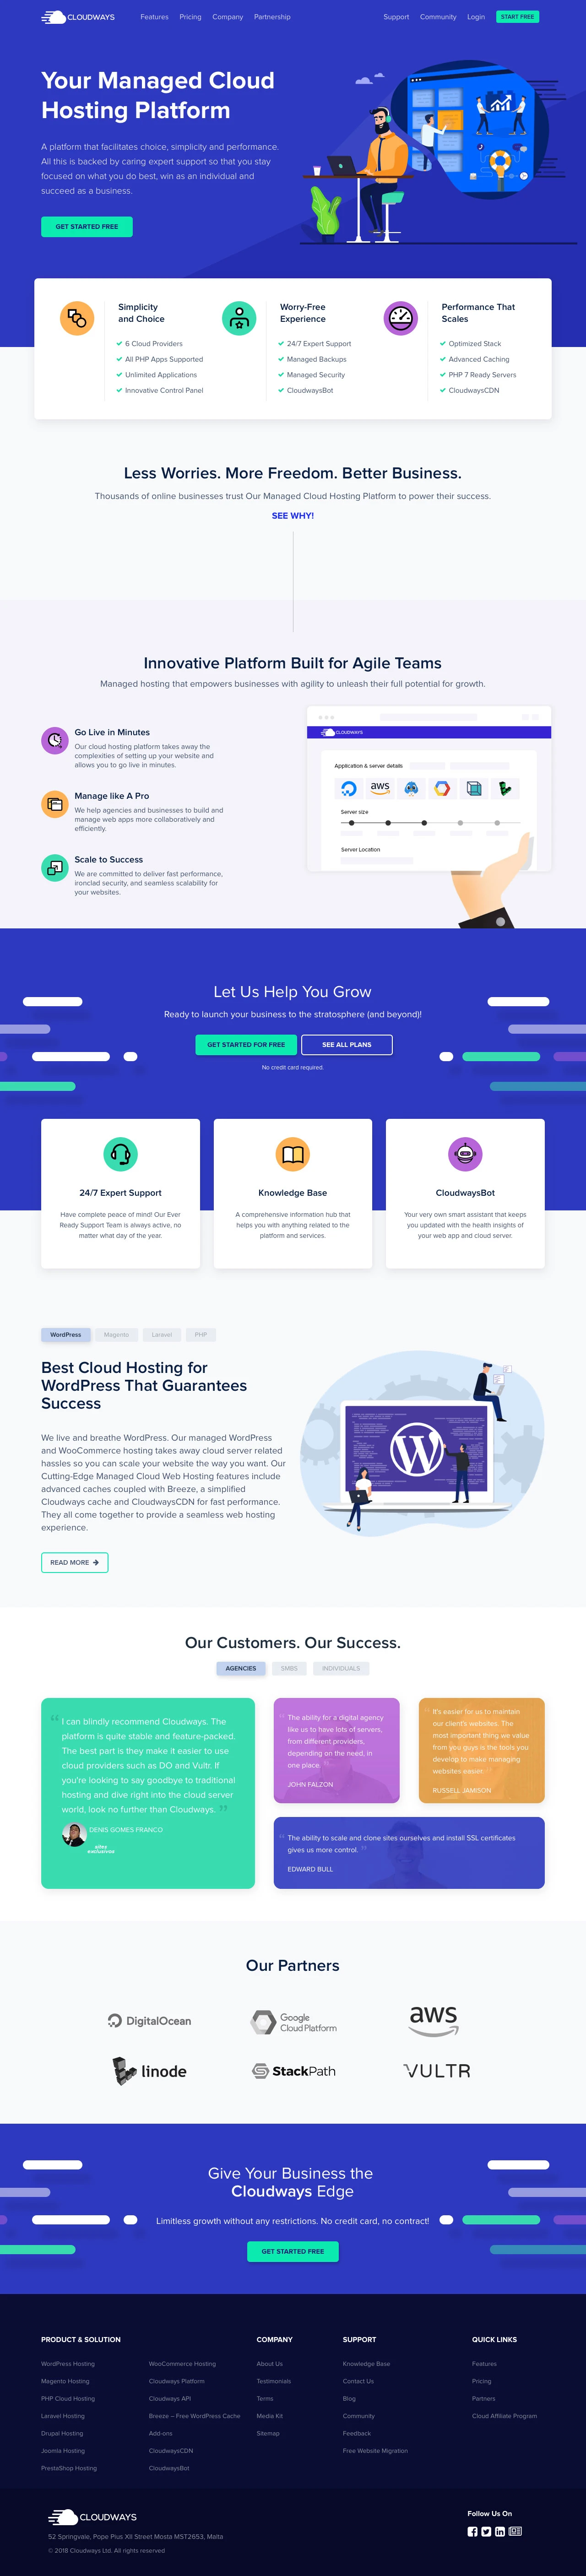 Cloudways Landing Page Example: A platform that facilitates choice, simplicity and performance. All this is backed by caring expert support so that you stay focused on what you do best, win as an individual and succeed as a business.